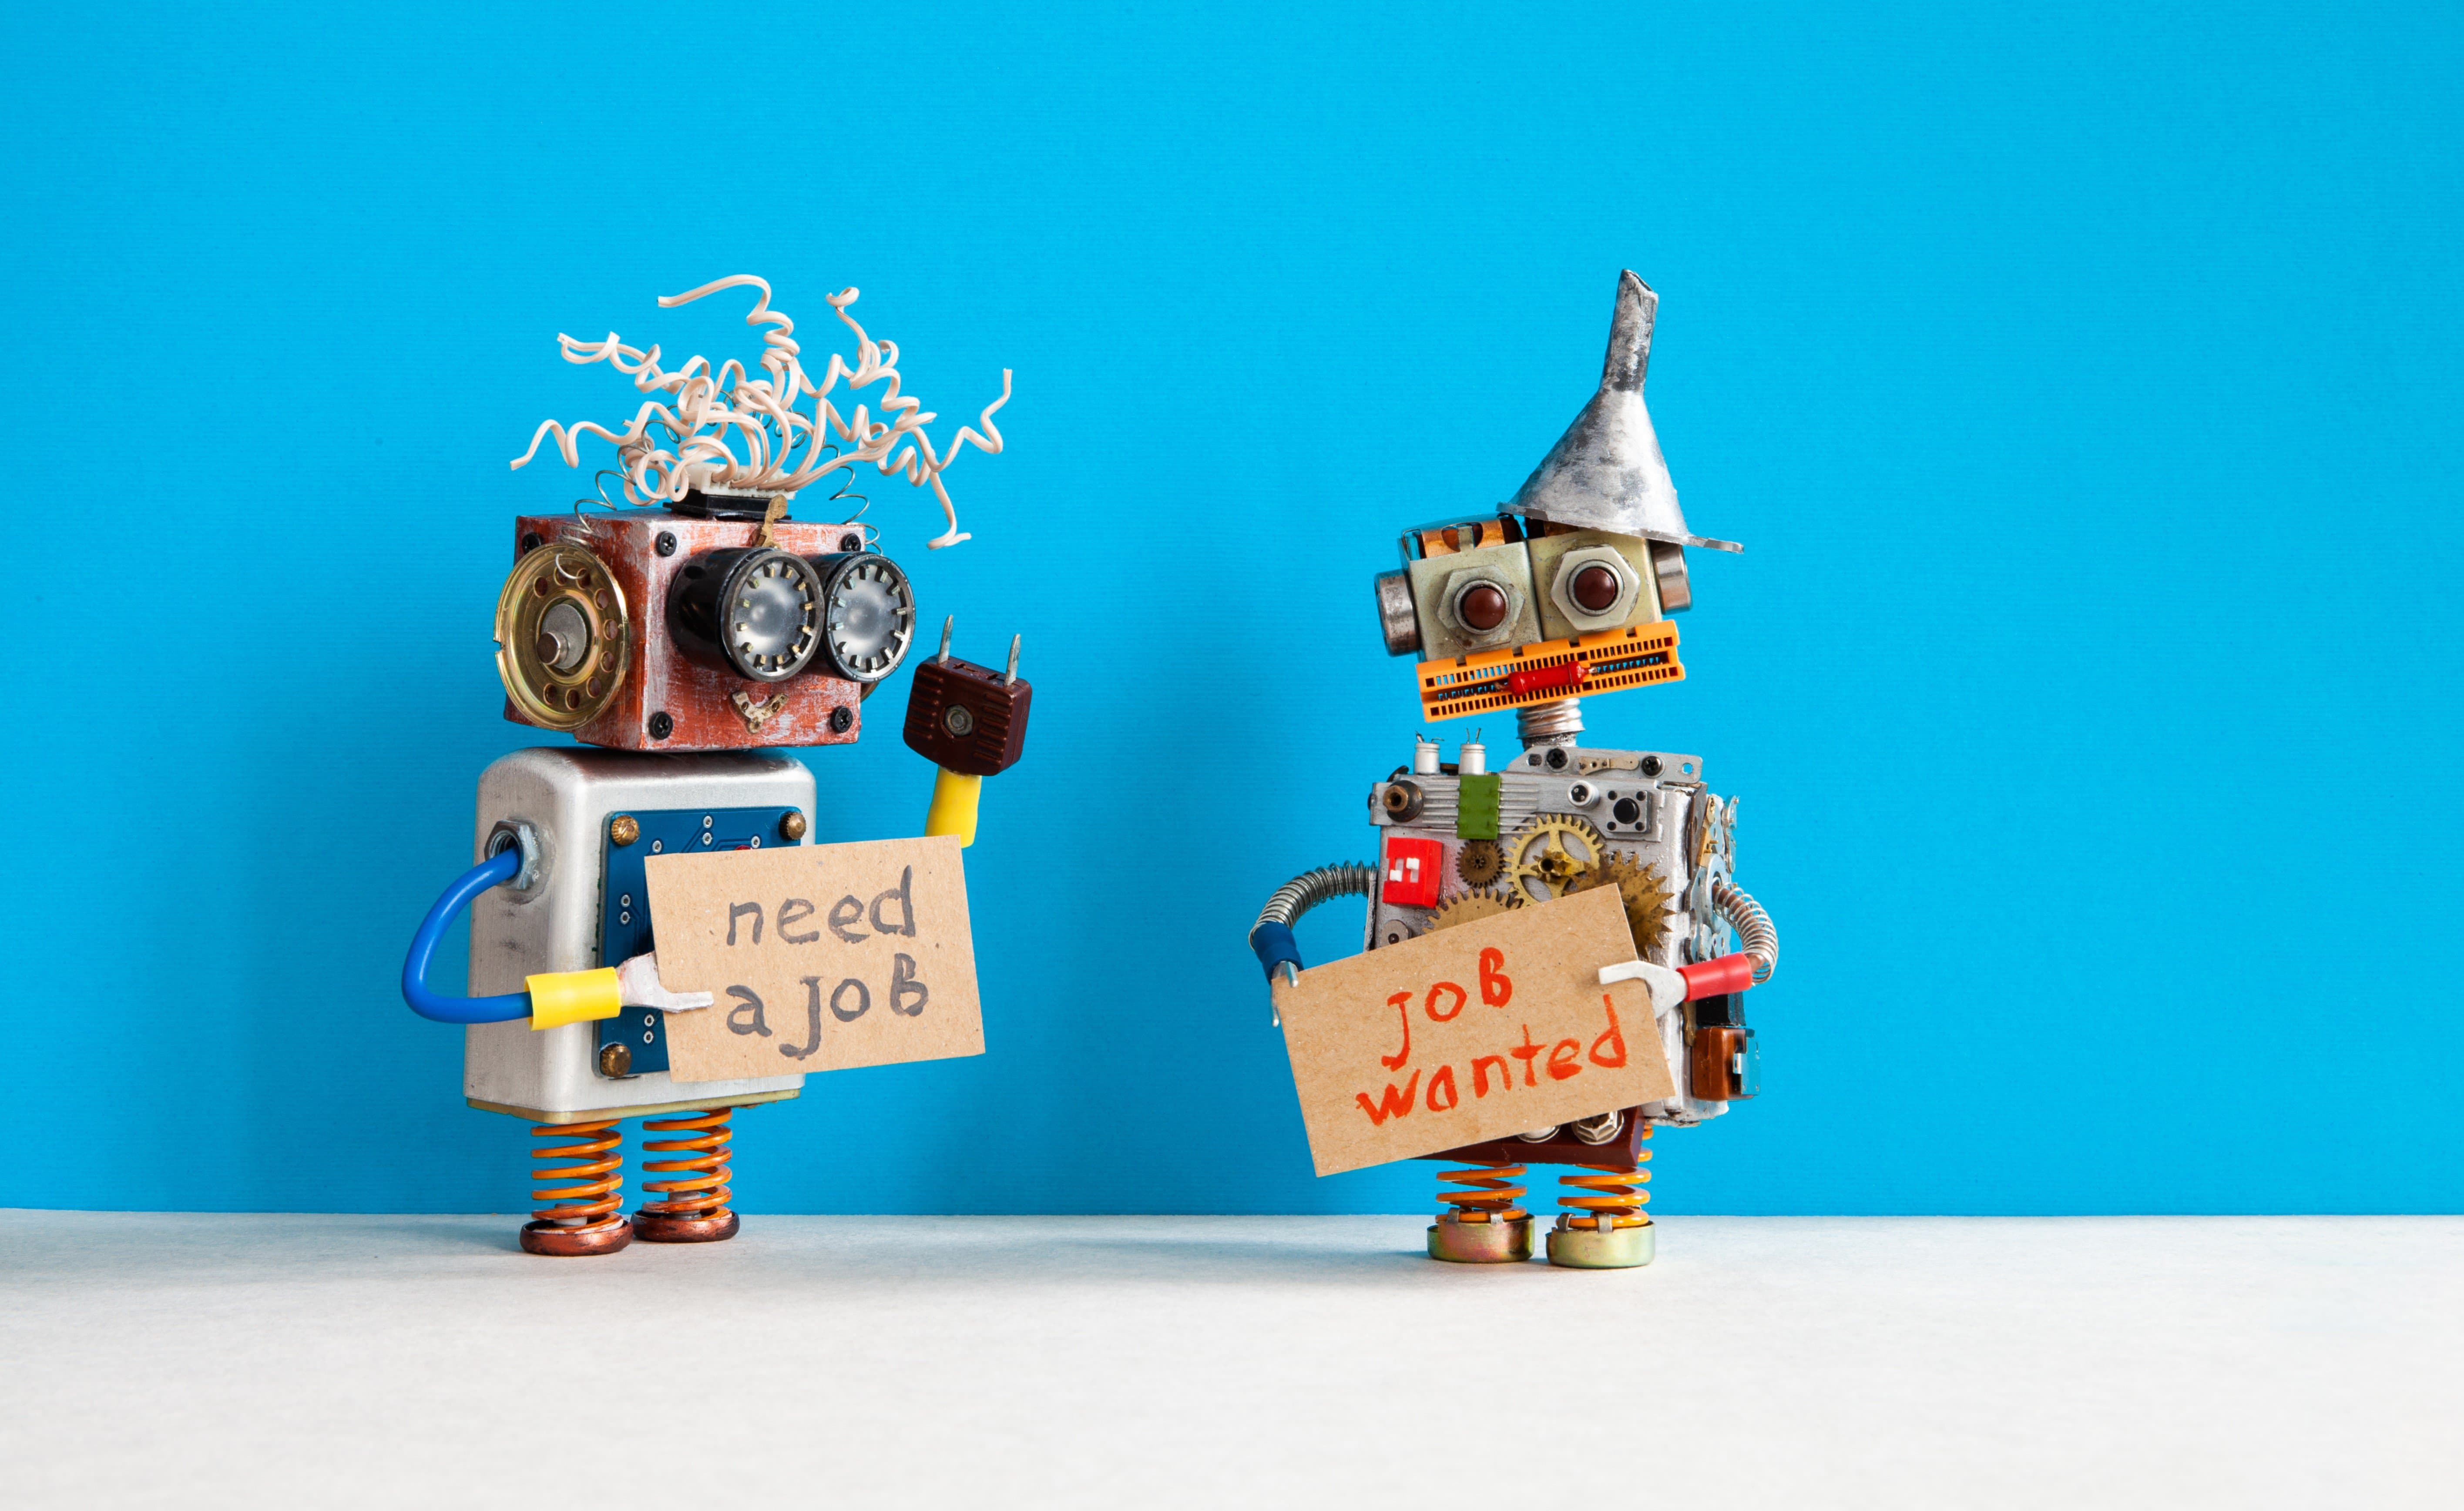 two robot figures made from household items each holding a cardboard sign asking for work